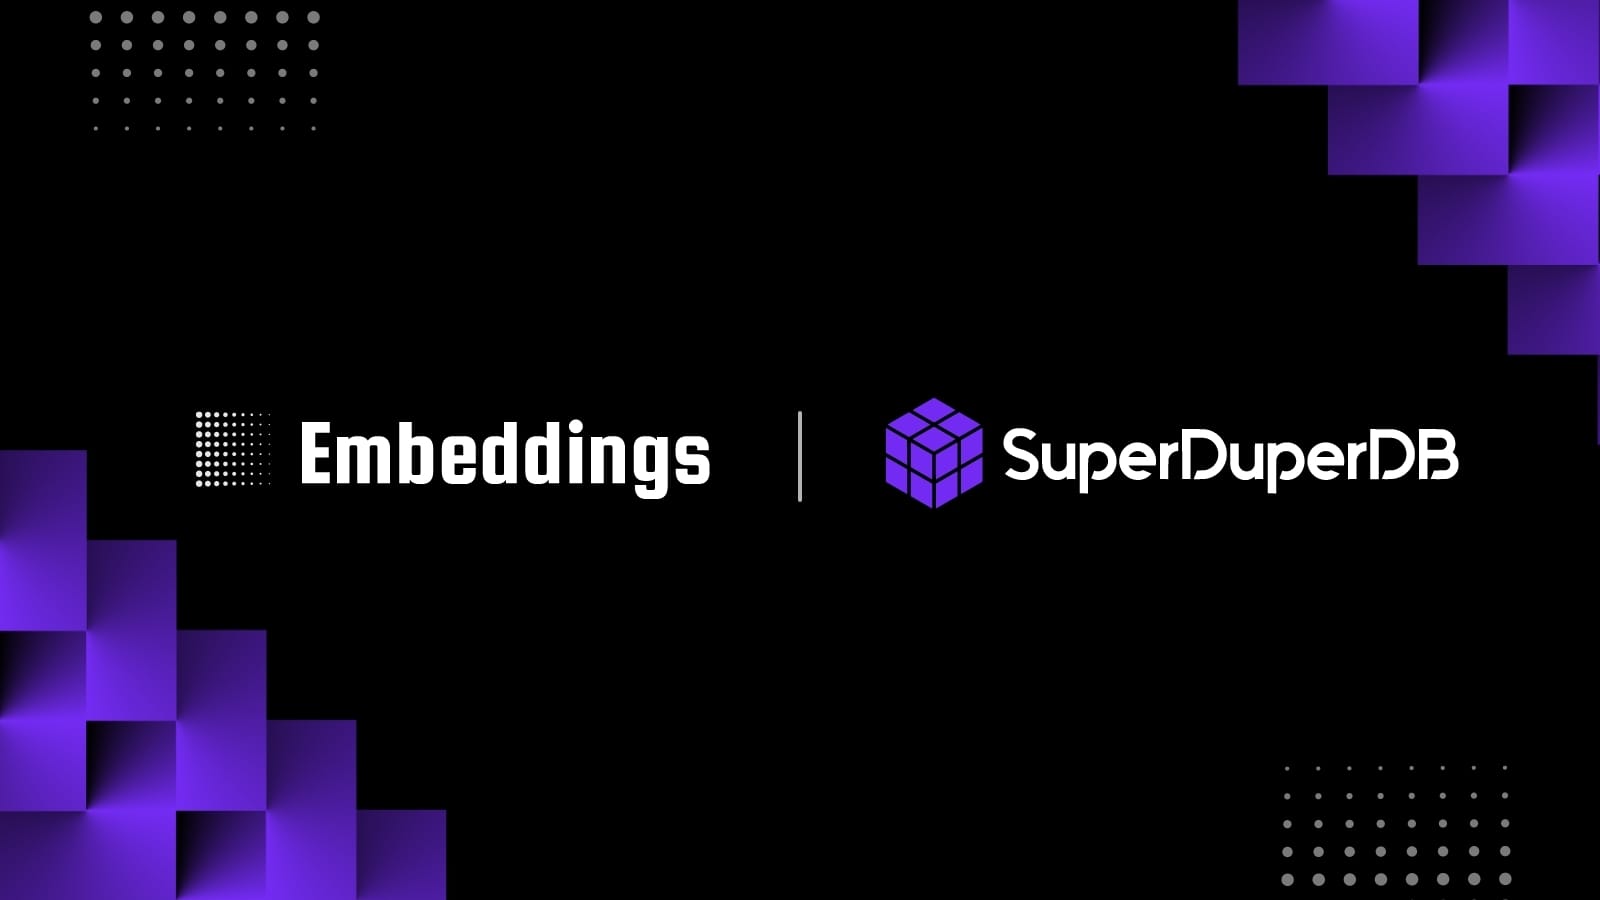 Black background with purple accents featuring the white text "Embeddings" on the left and "SuperDuperDB" on the right.